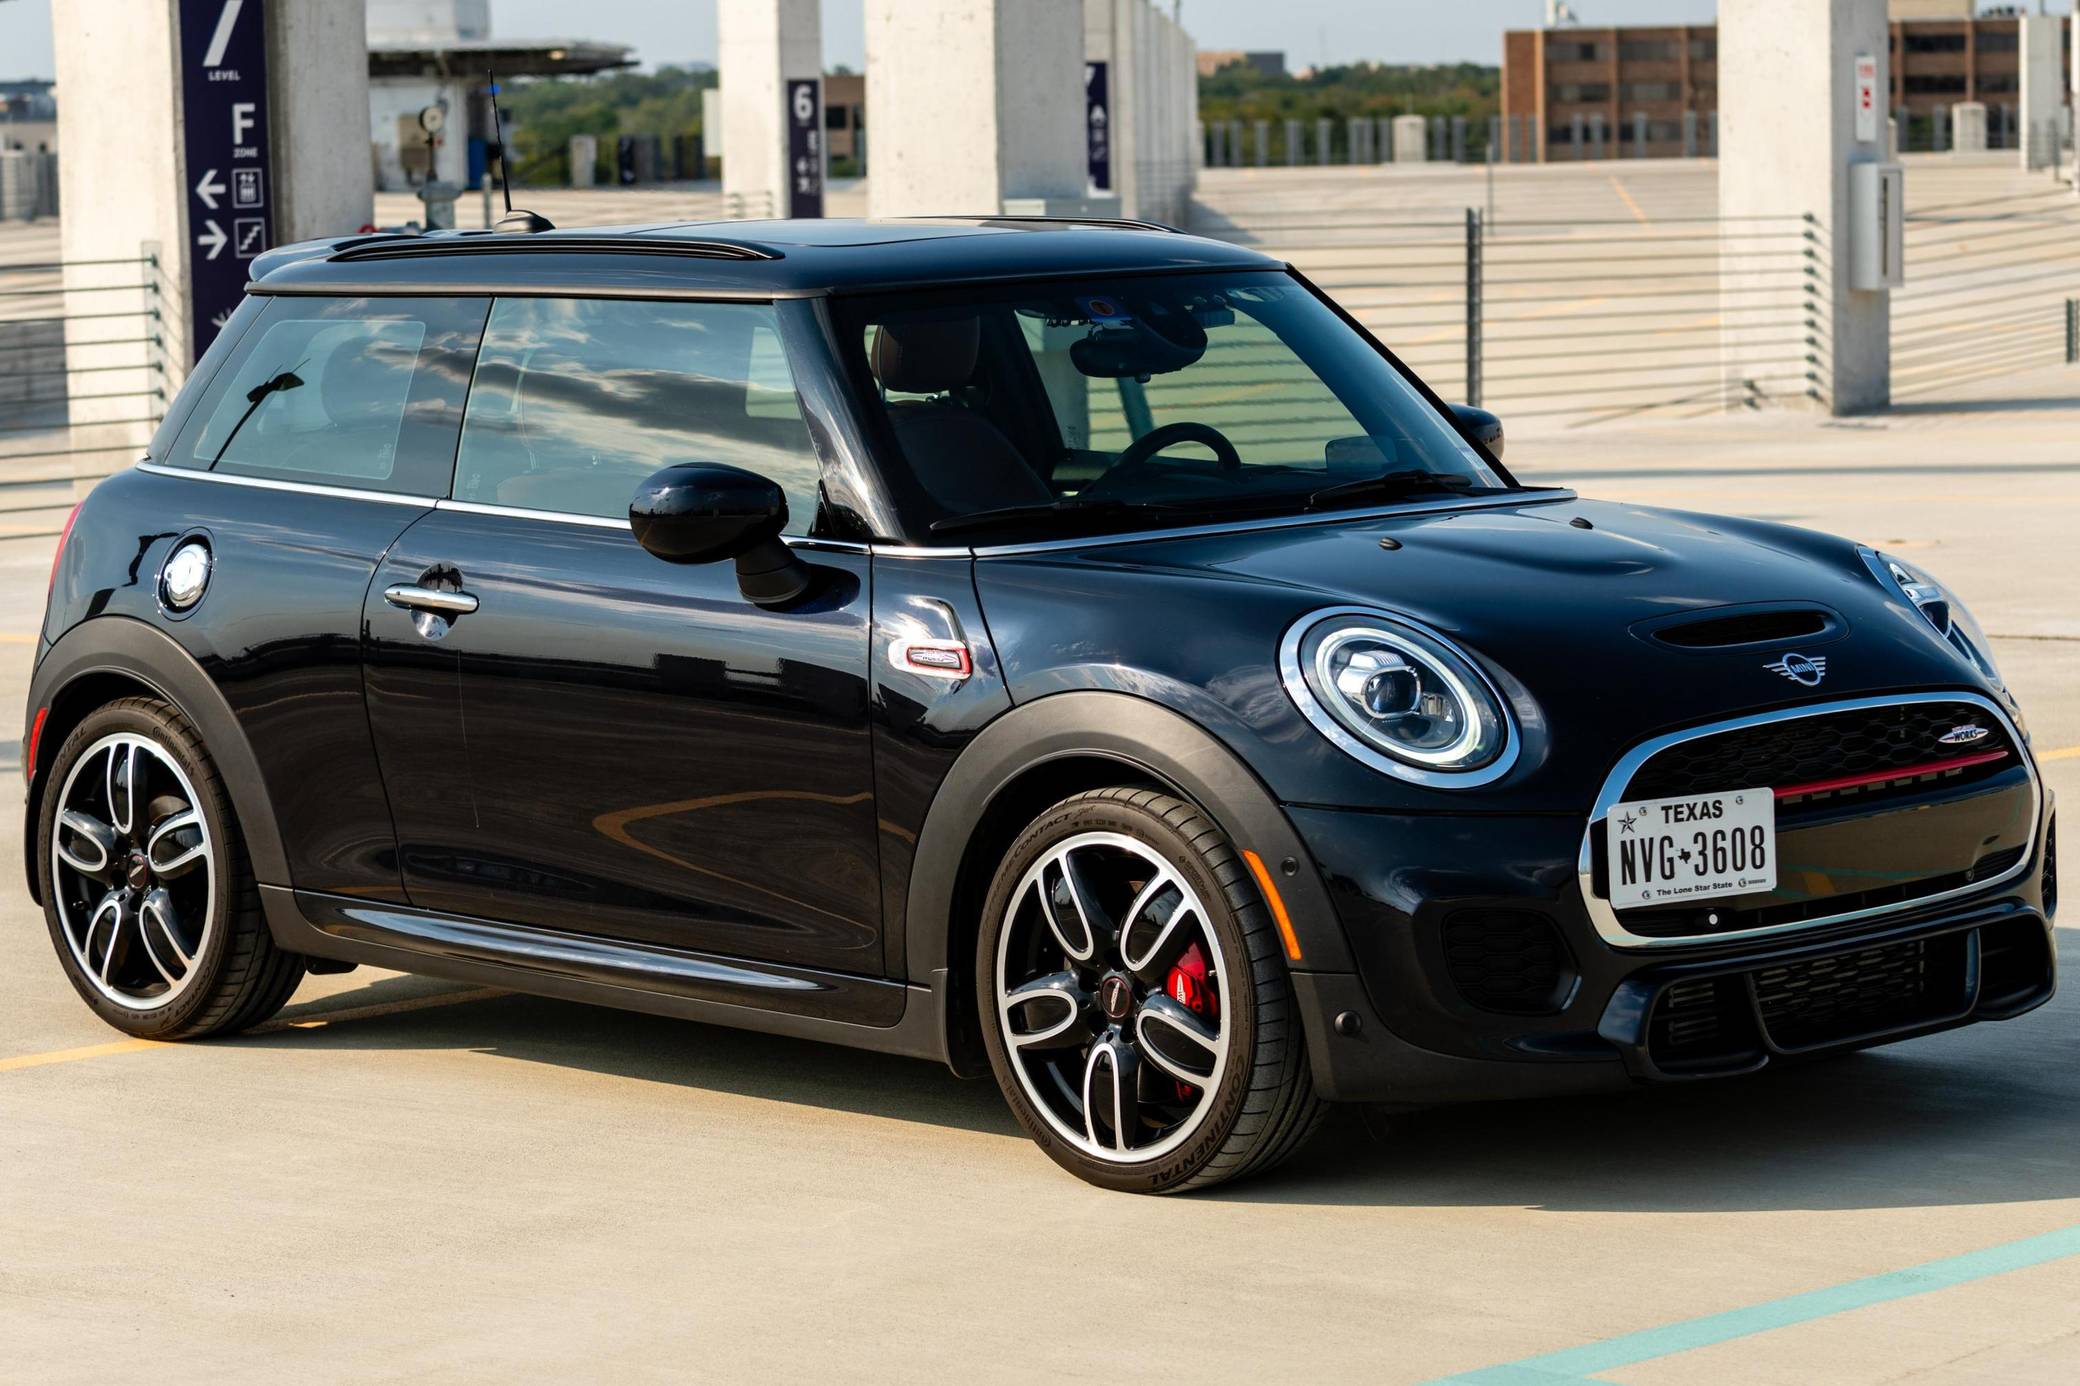 The Mini Cooper that changed my mind